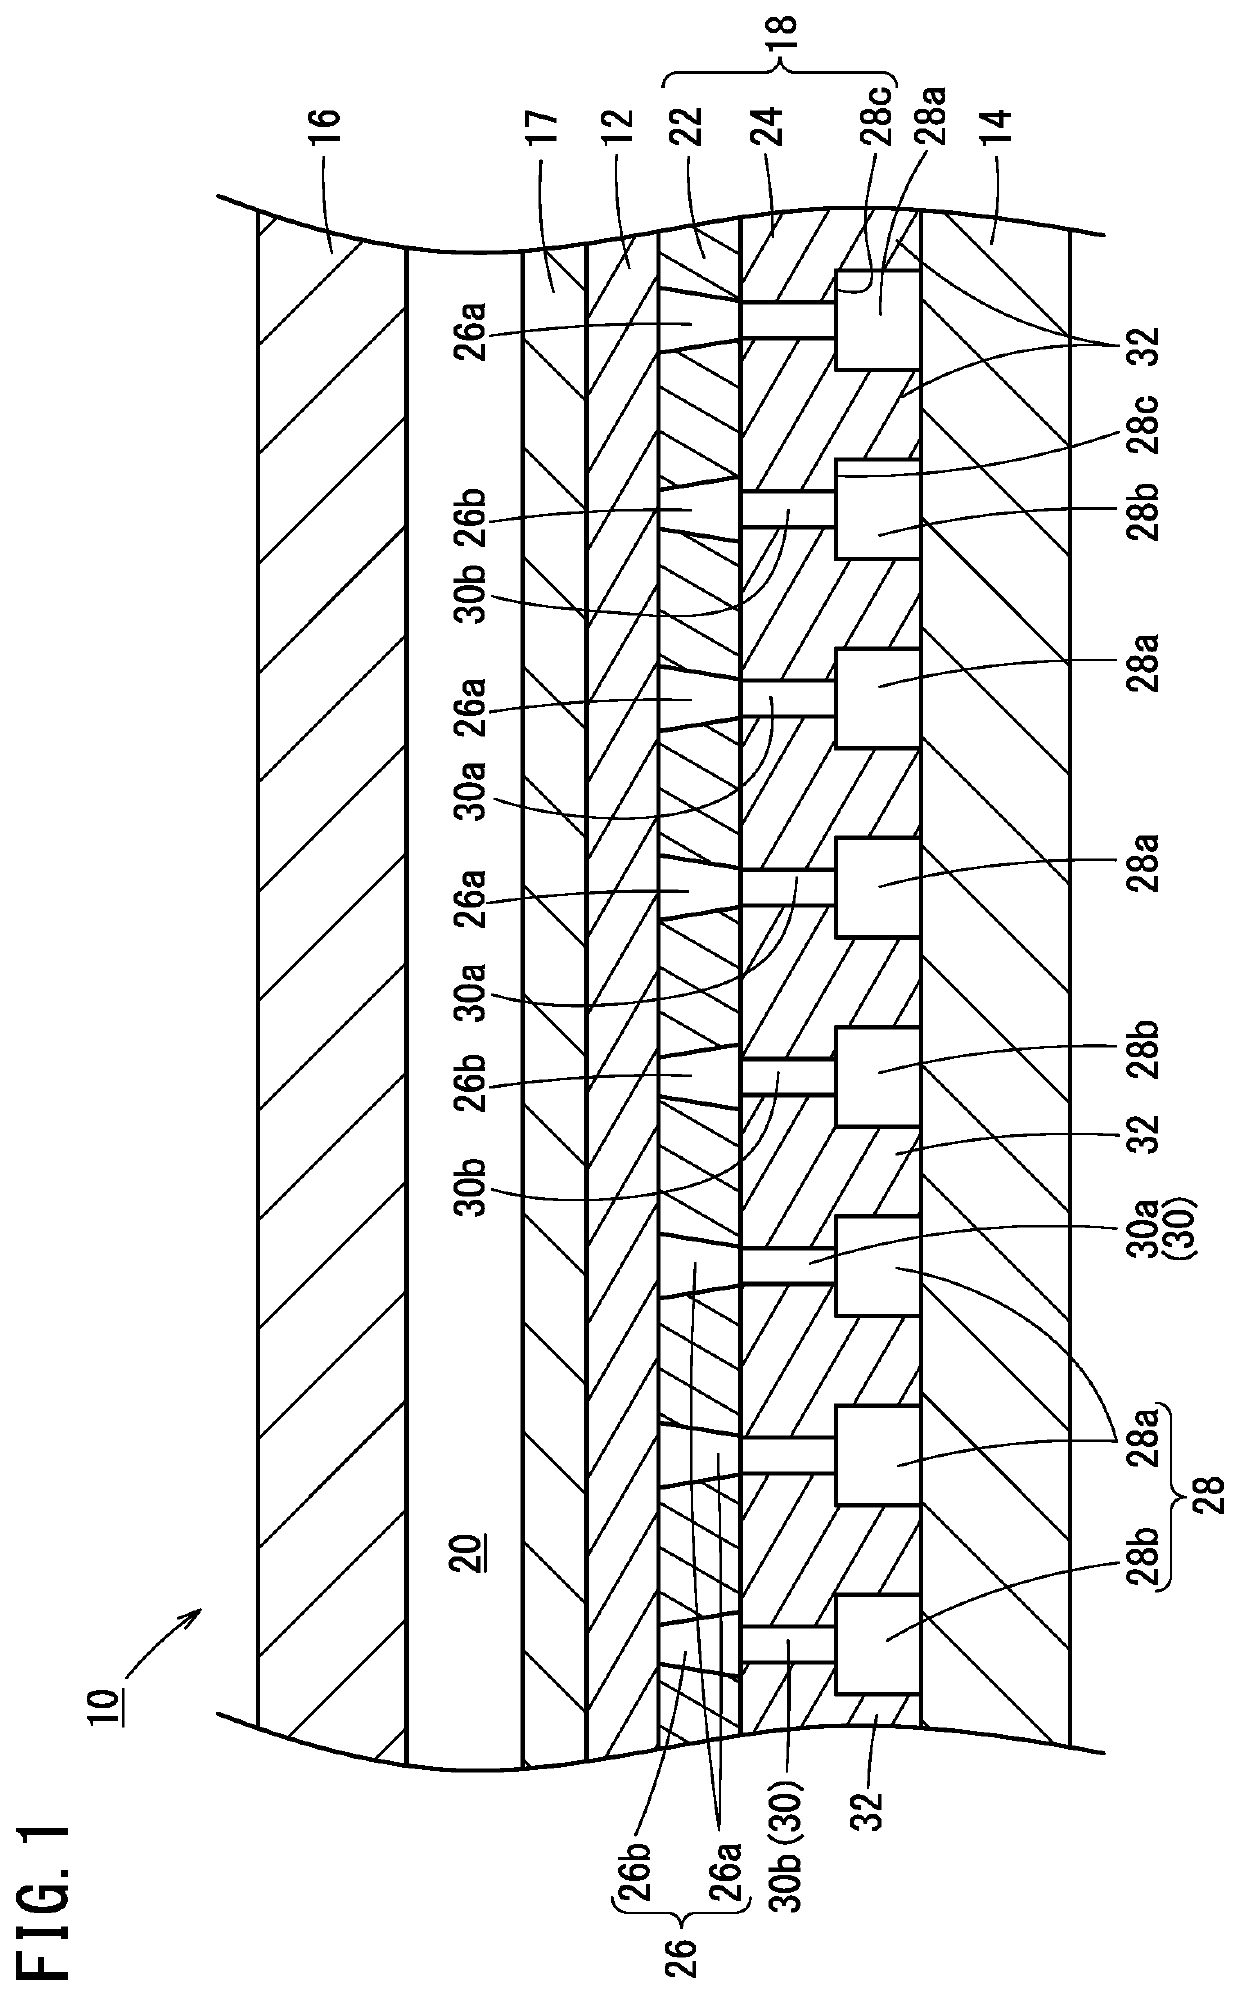 Support member for an electrochemical cell and electrochemical hydrogen compressor